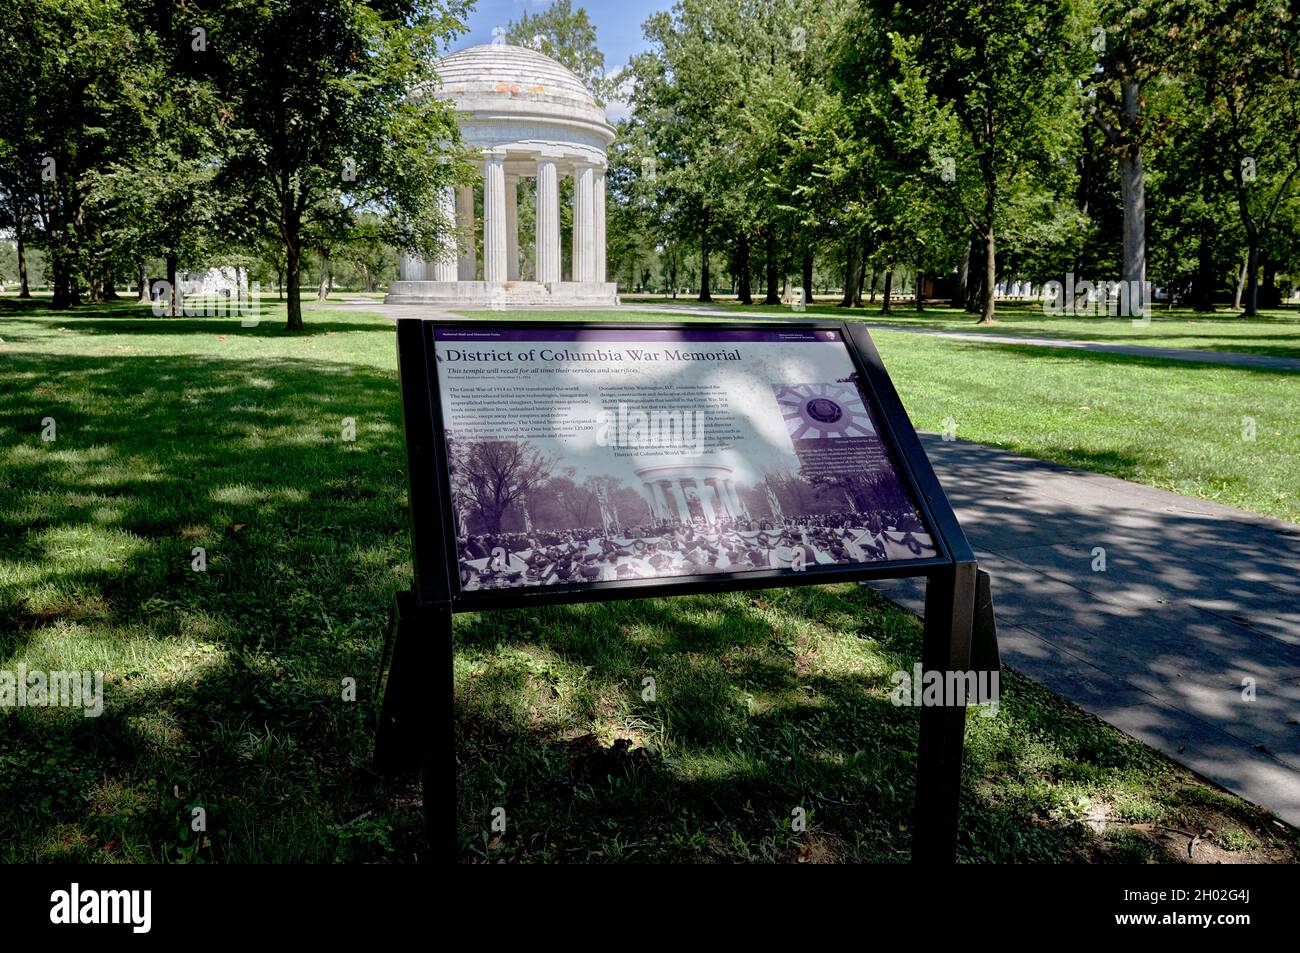 District of Columbia War Memorial sign and monument Stock Photo